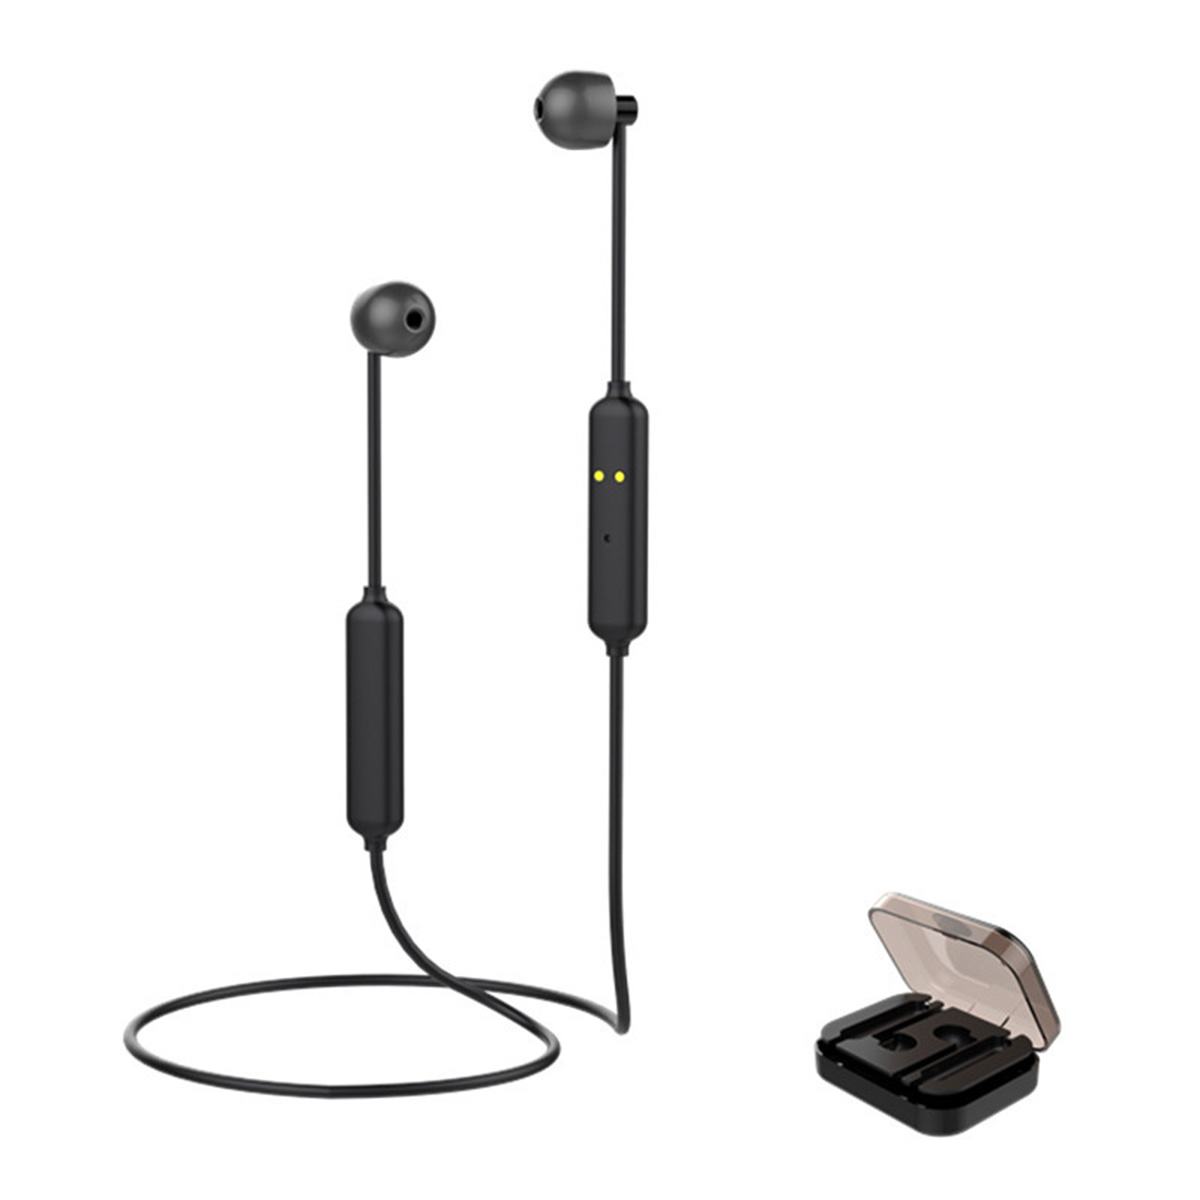 

[bluetooth 5.0] Mini Sport Magnetic Wireless Headset Hifi Stereo Sound Wired Control Neckband Earphone With Portable Charging Box